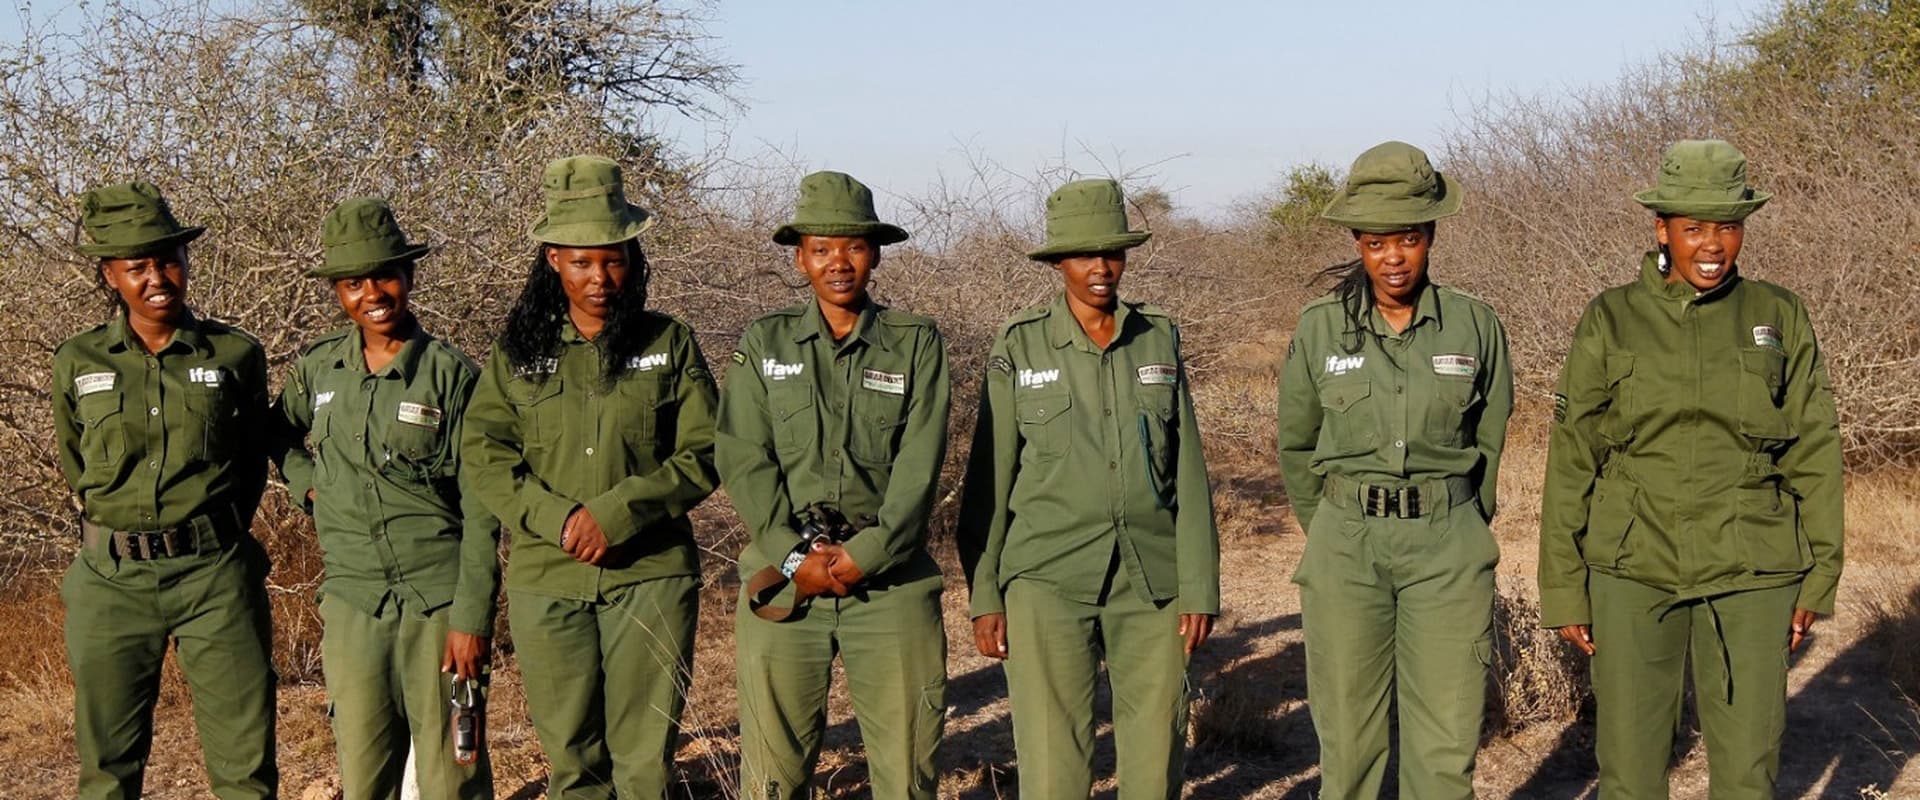 Women, Maasai and rangers - The lionesses of Kenya